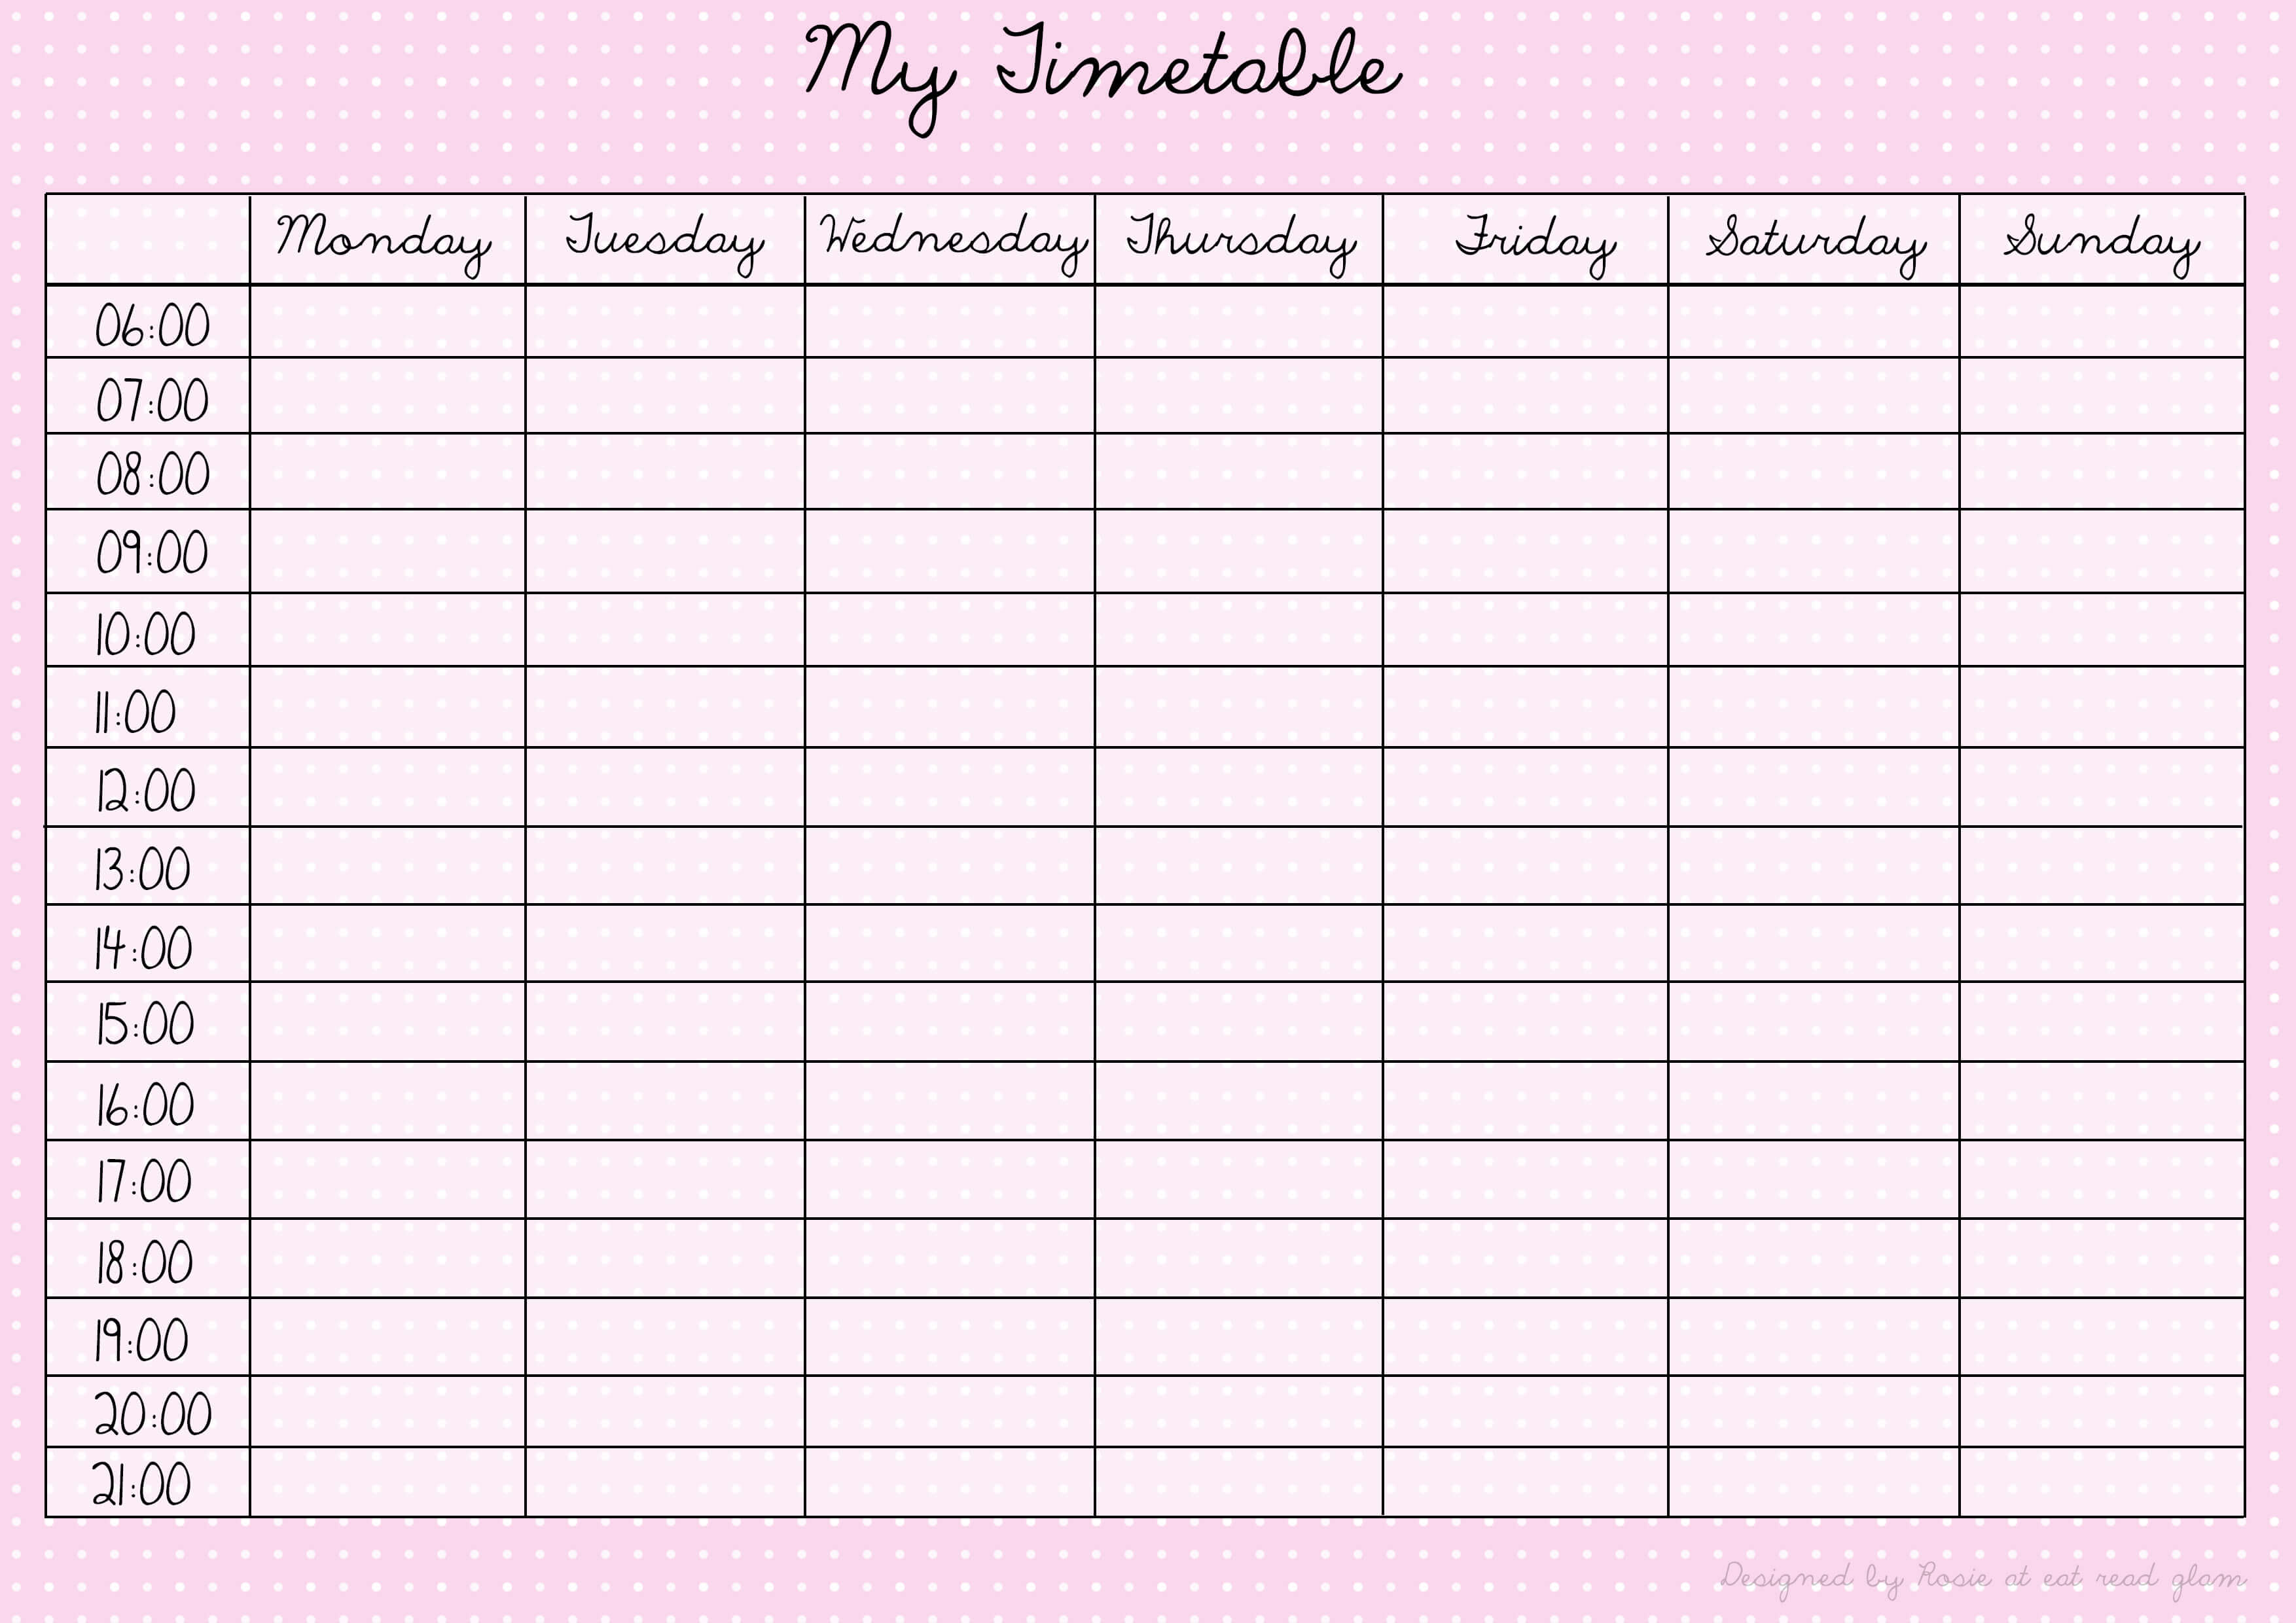 Revision Timetable Template Blank With Blank Revision Timetable Template